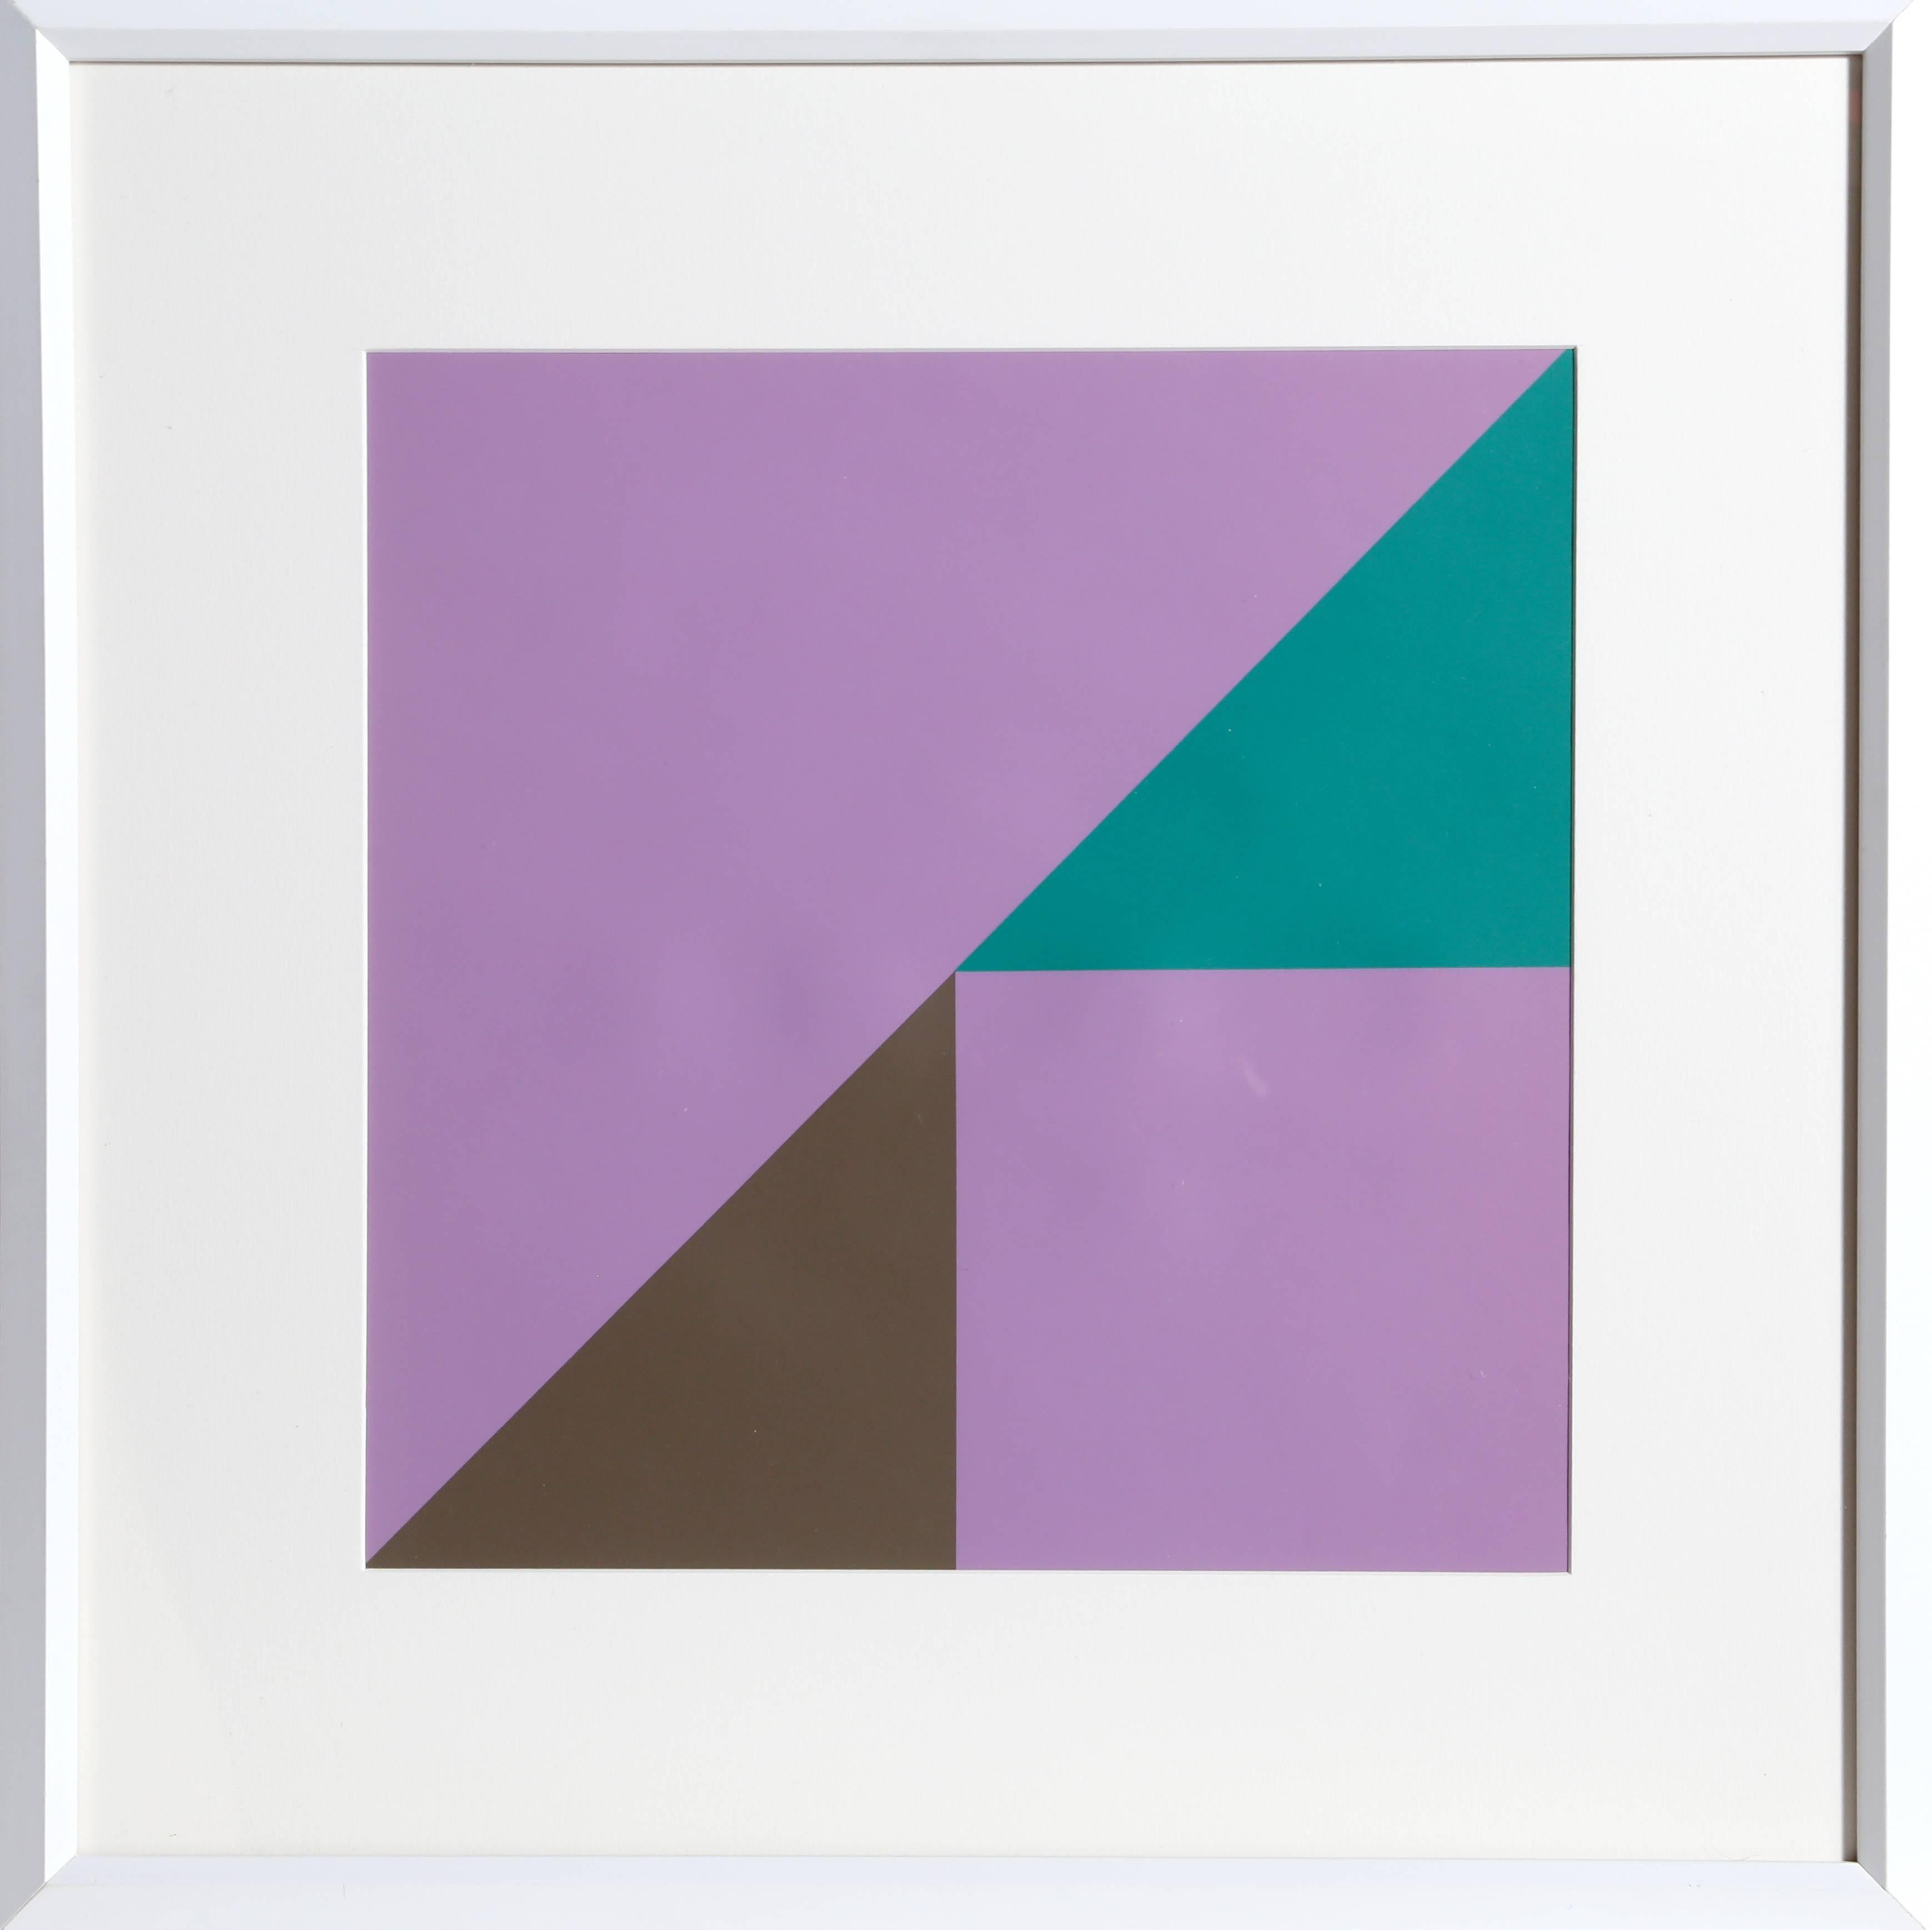 "September", Geometric Abstract by Hugo Dietz 1971